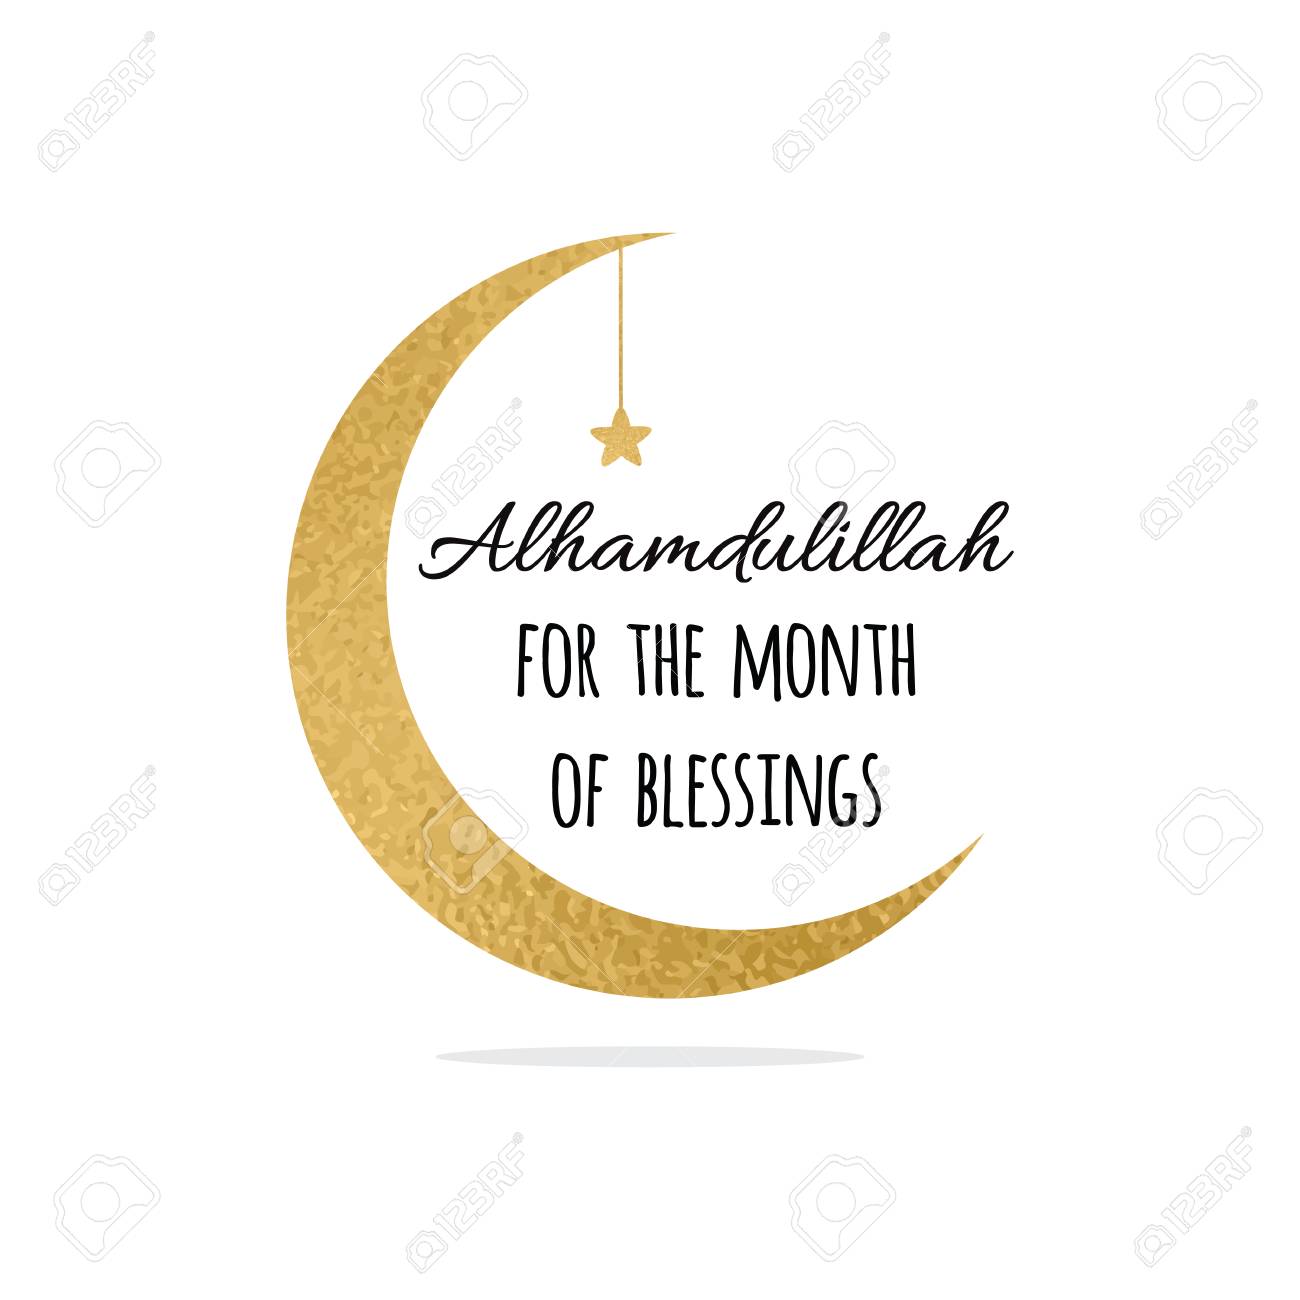 Alhamdulillah quote into golden crescent moon and star for Holy Month of Muslim Community, Ramadan Kareem celebration.